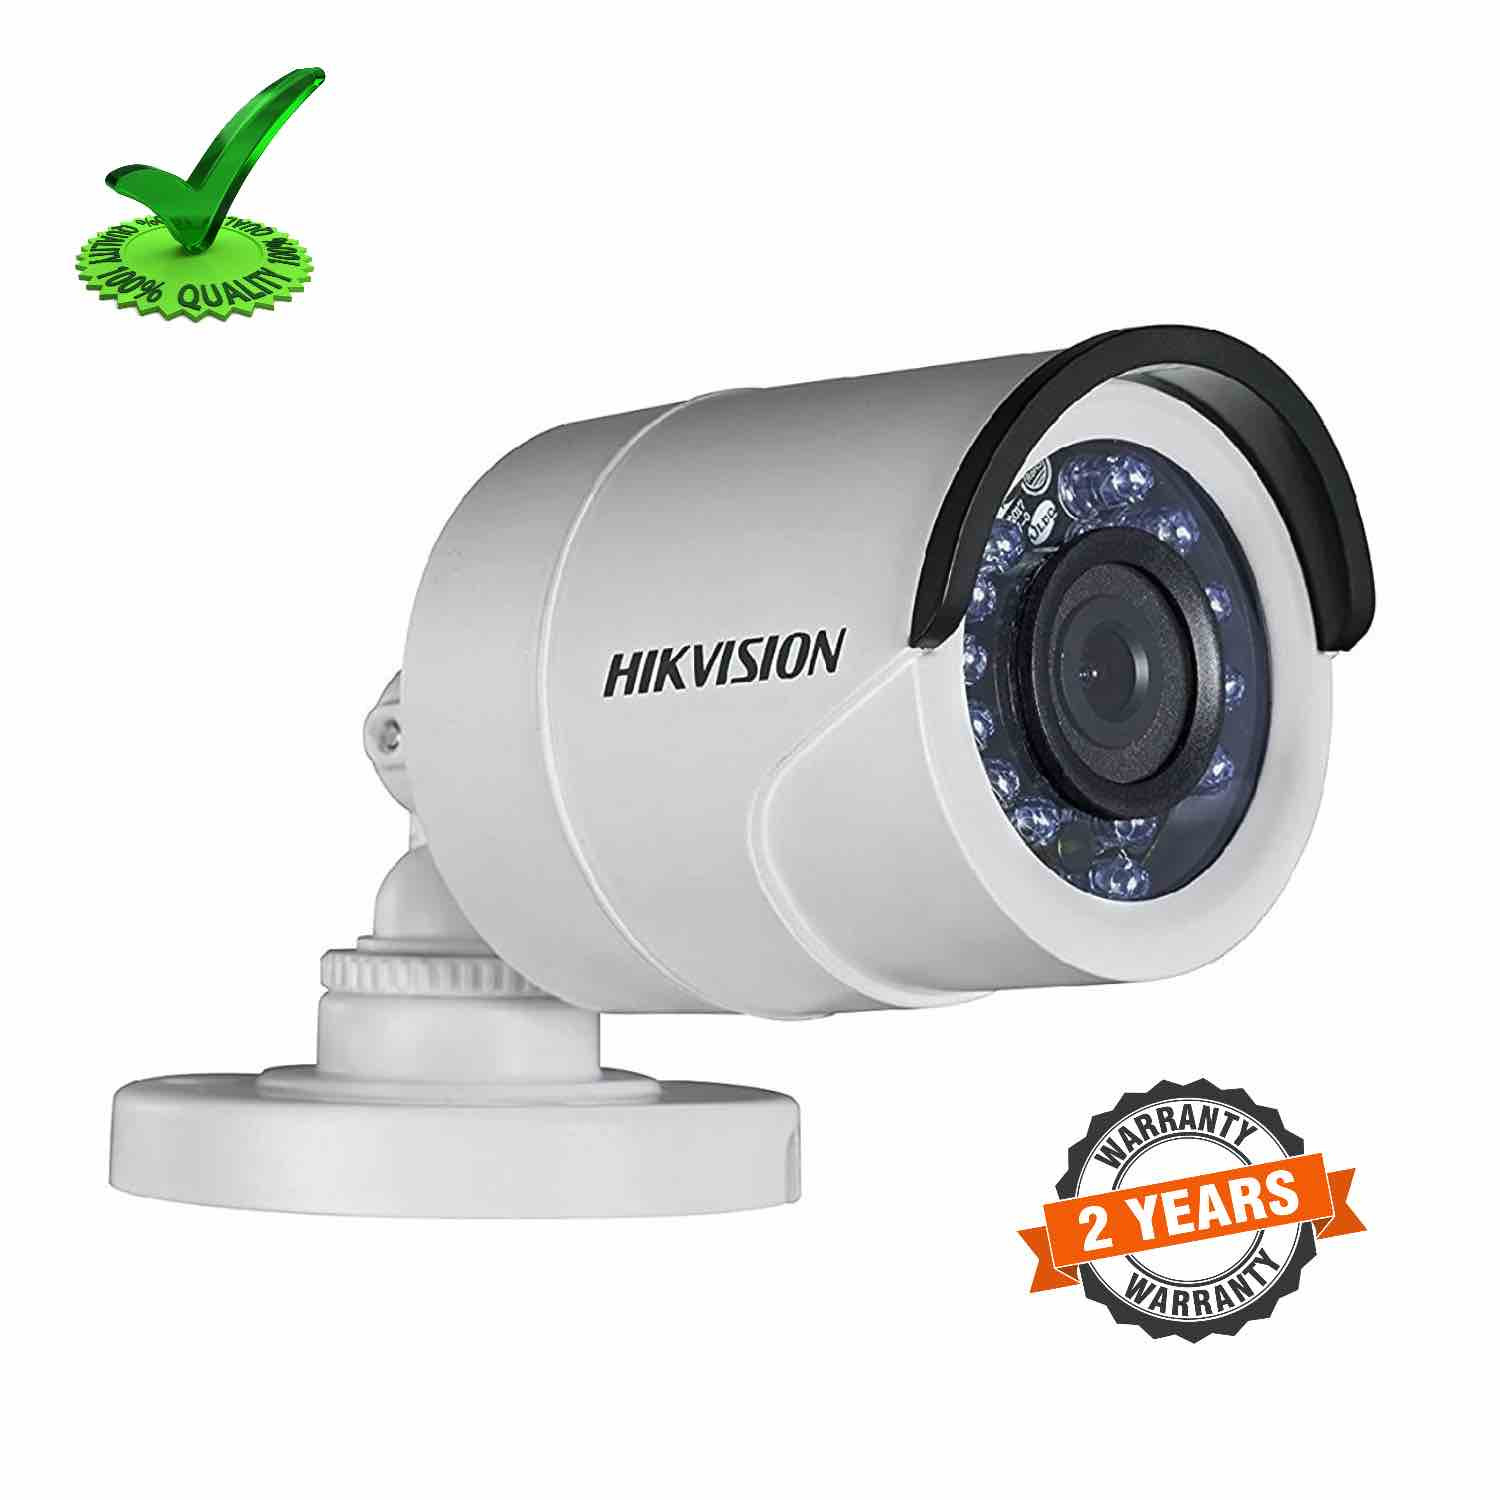  Hikvision DS-2CE1AD0T-IRPF 2mp 1080p HD Bullet Camera